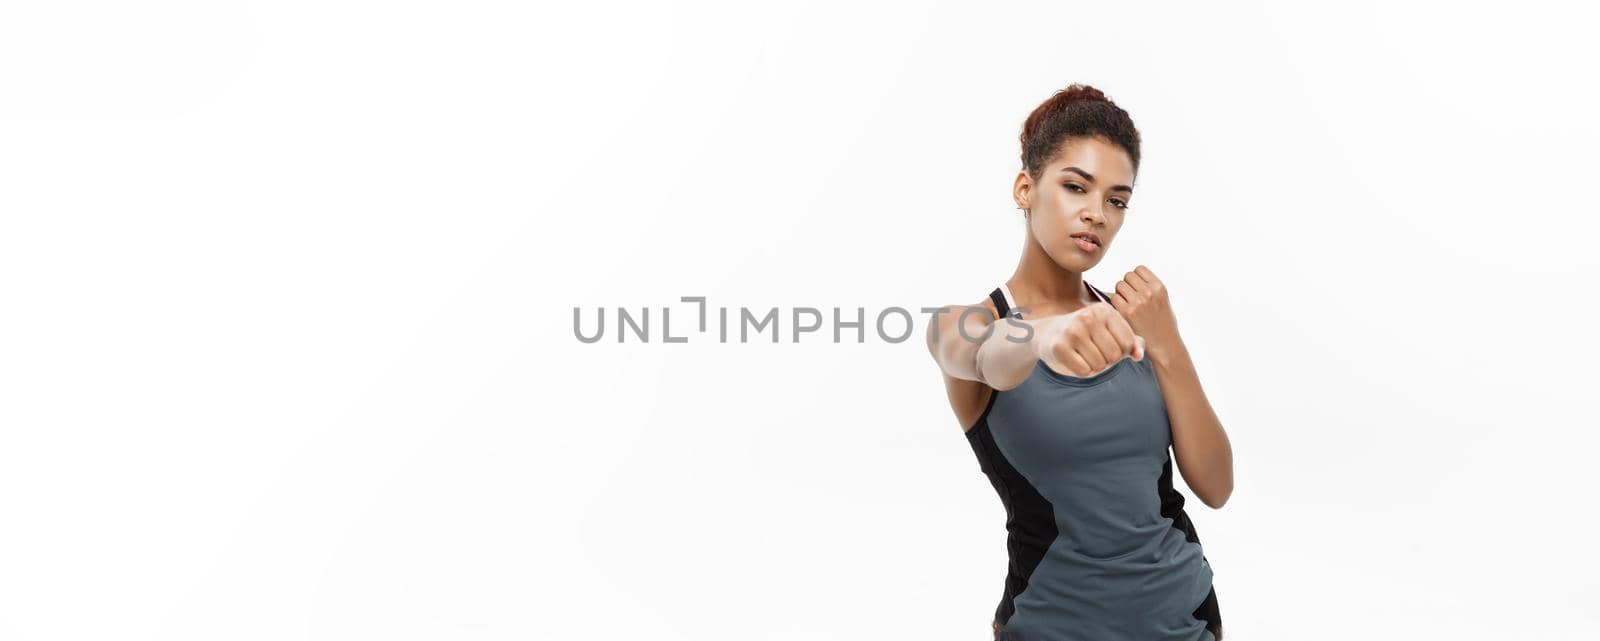 Healthy and Fitness concept - portrait of African American woman punching in air with confident face. Isolated on white background